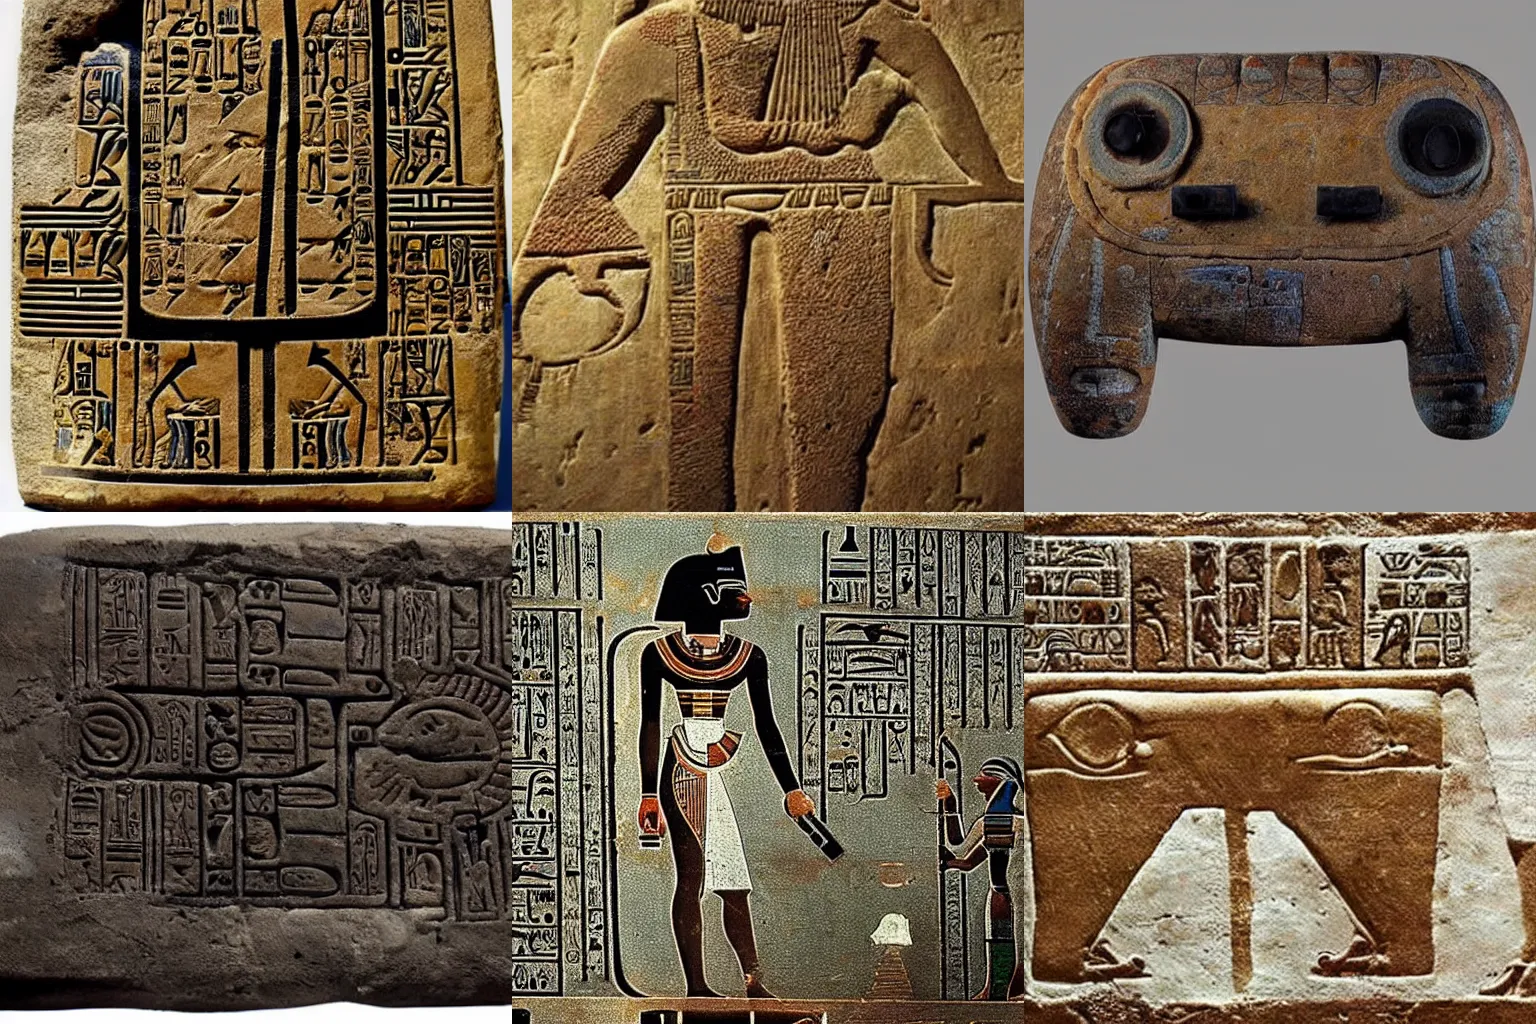 Prompt: A gaming controller that was created and designed in Ancient Egypt, 1000 B.C